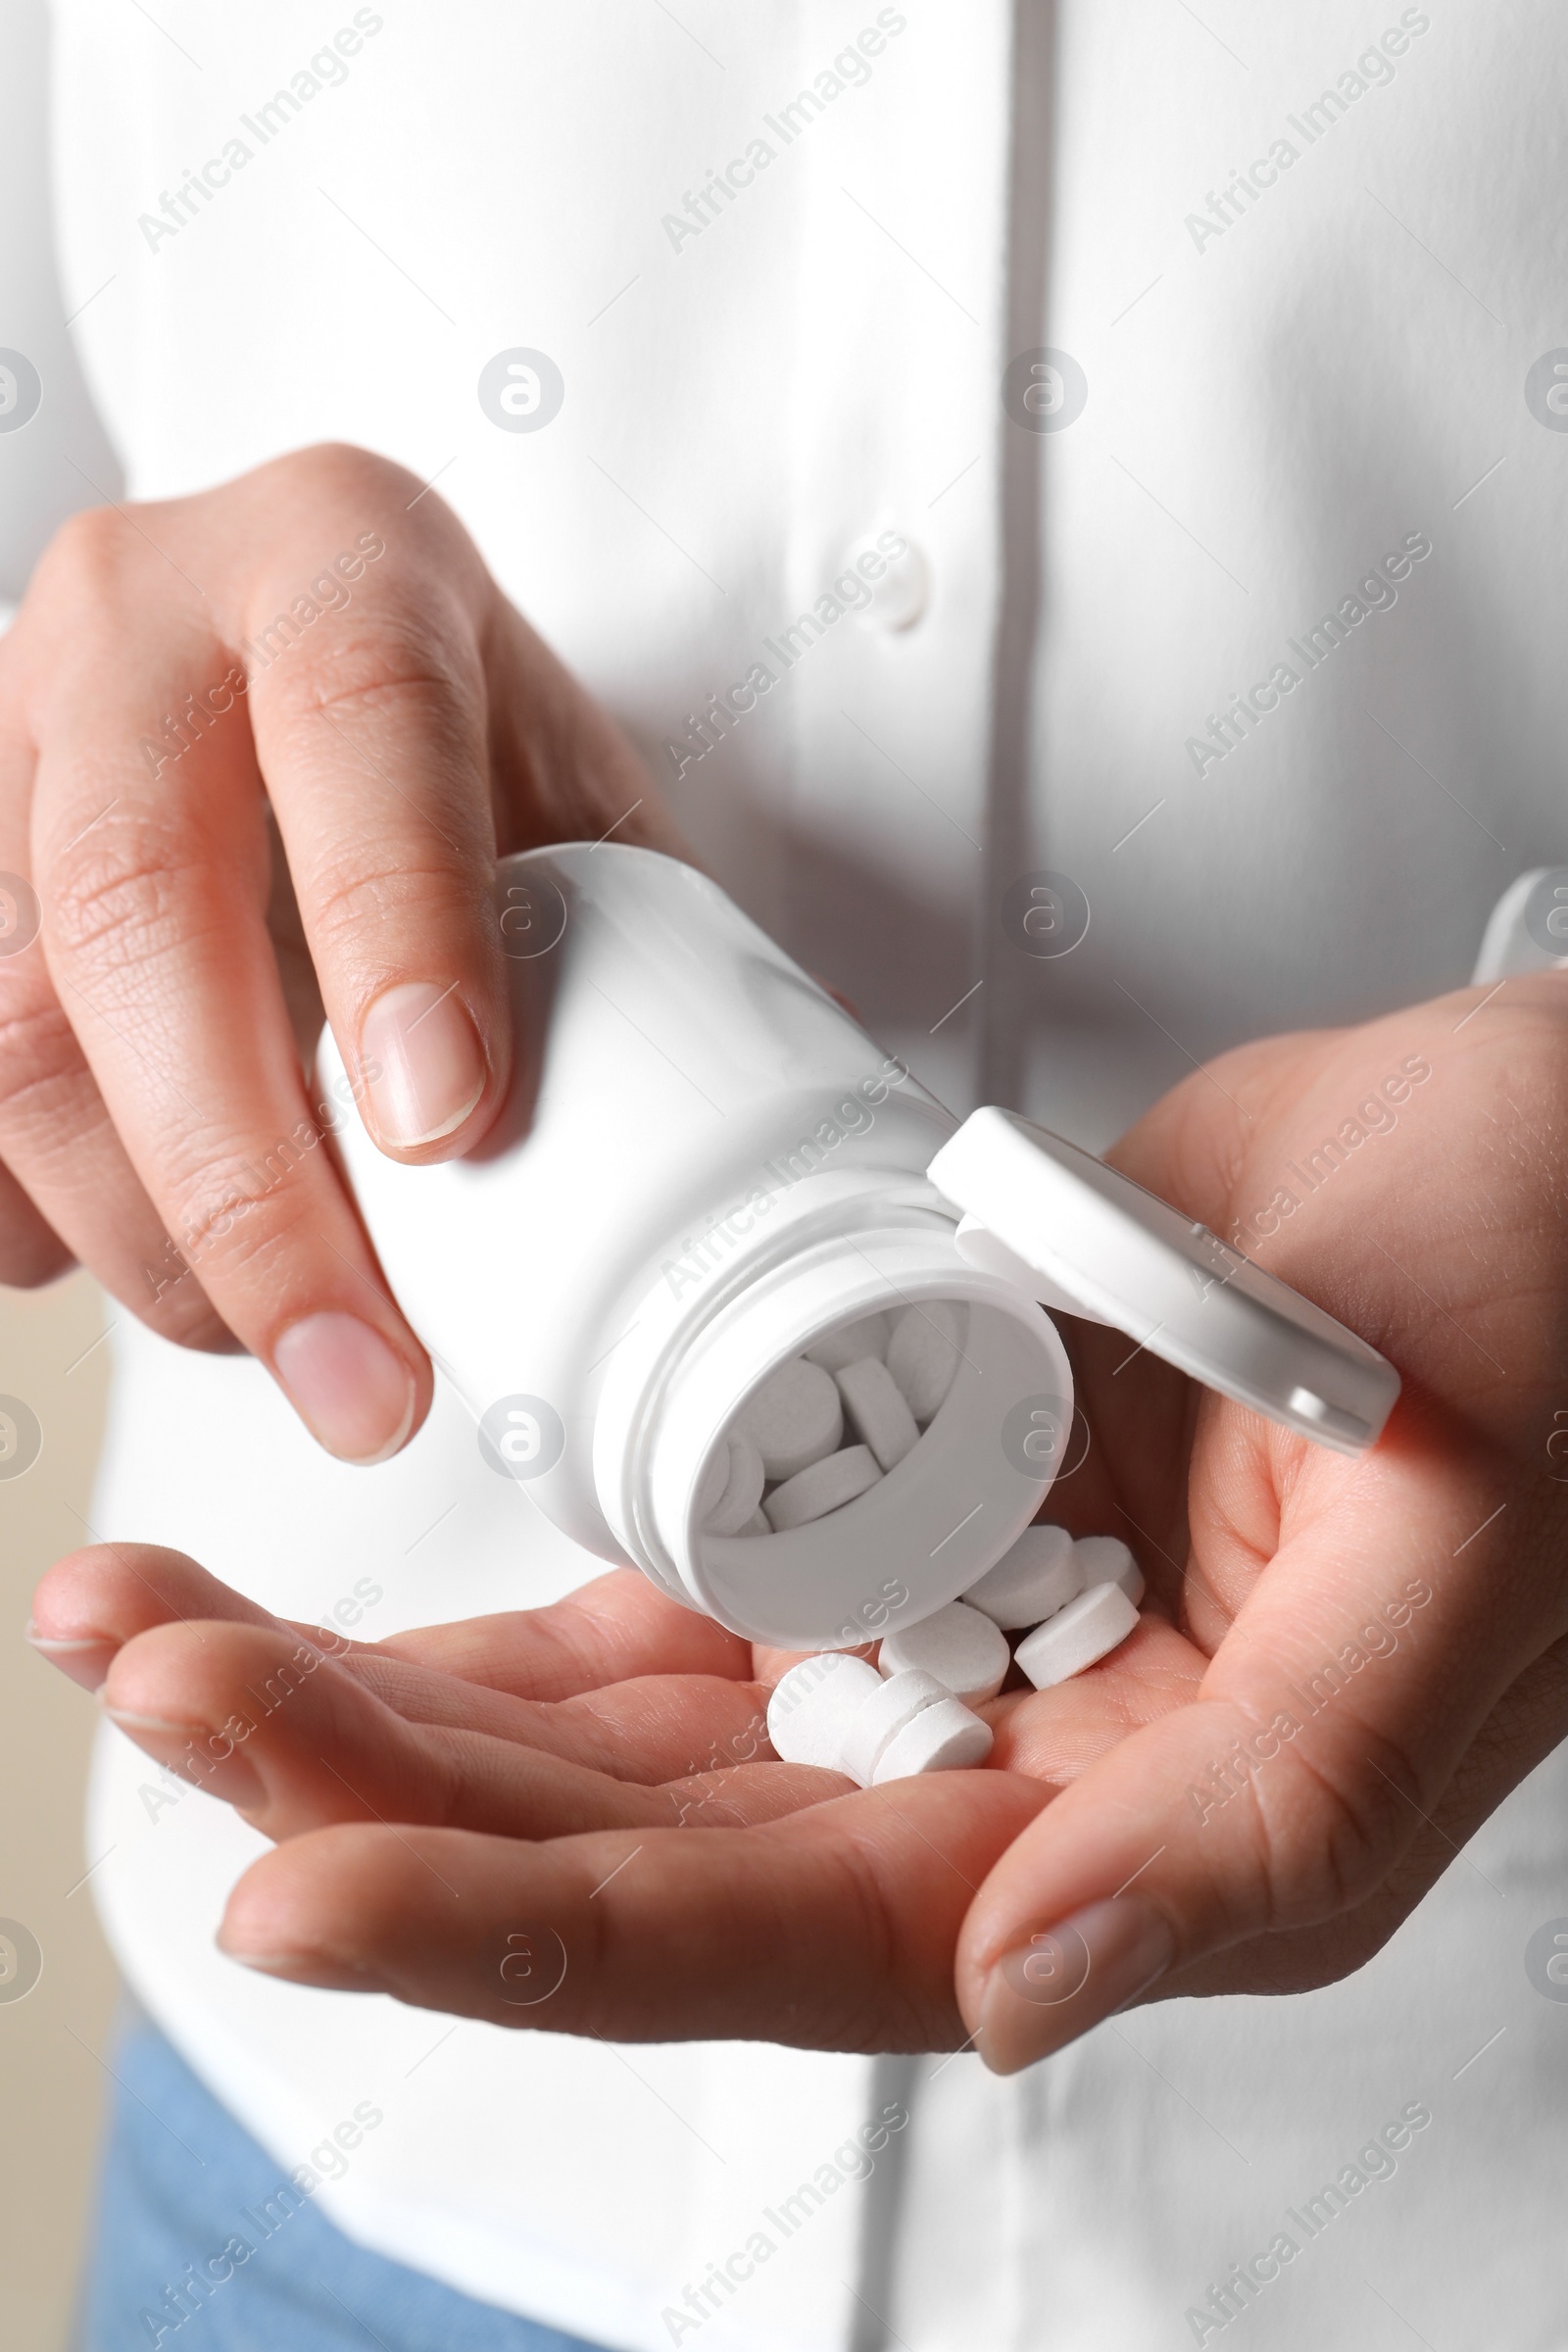 Photo of Woman pouring pills from bottle, closeup view